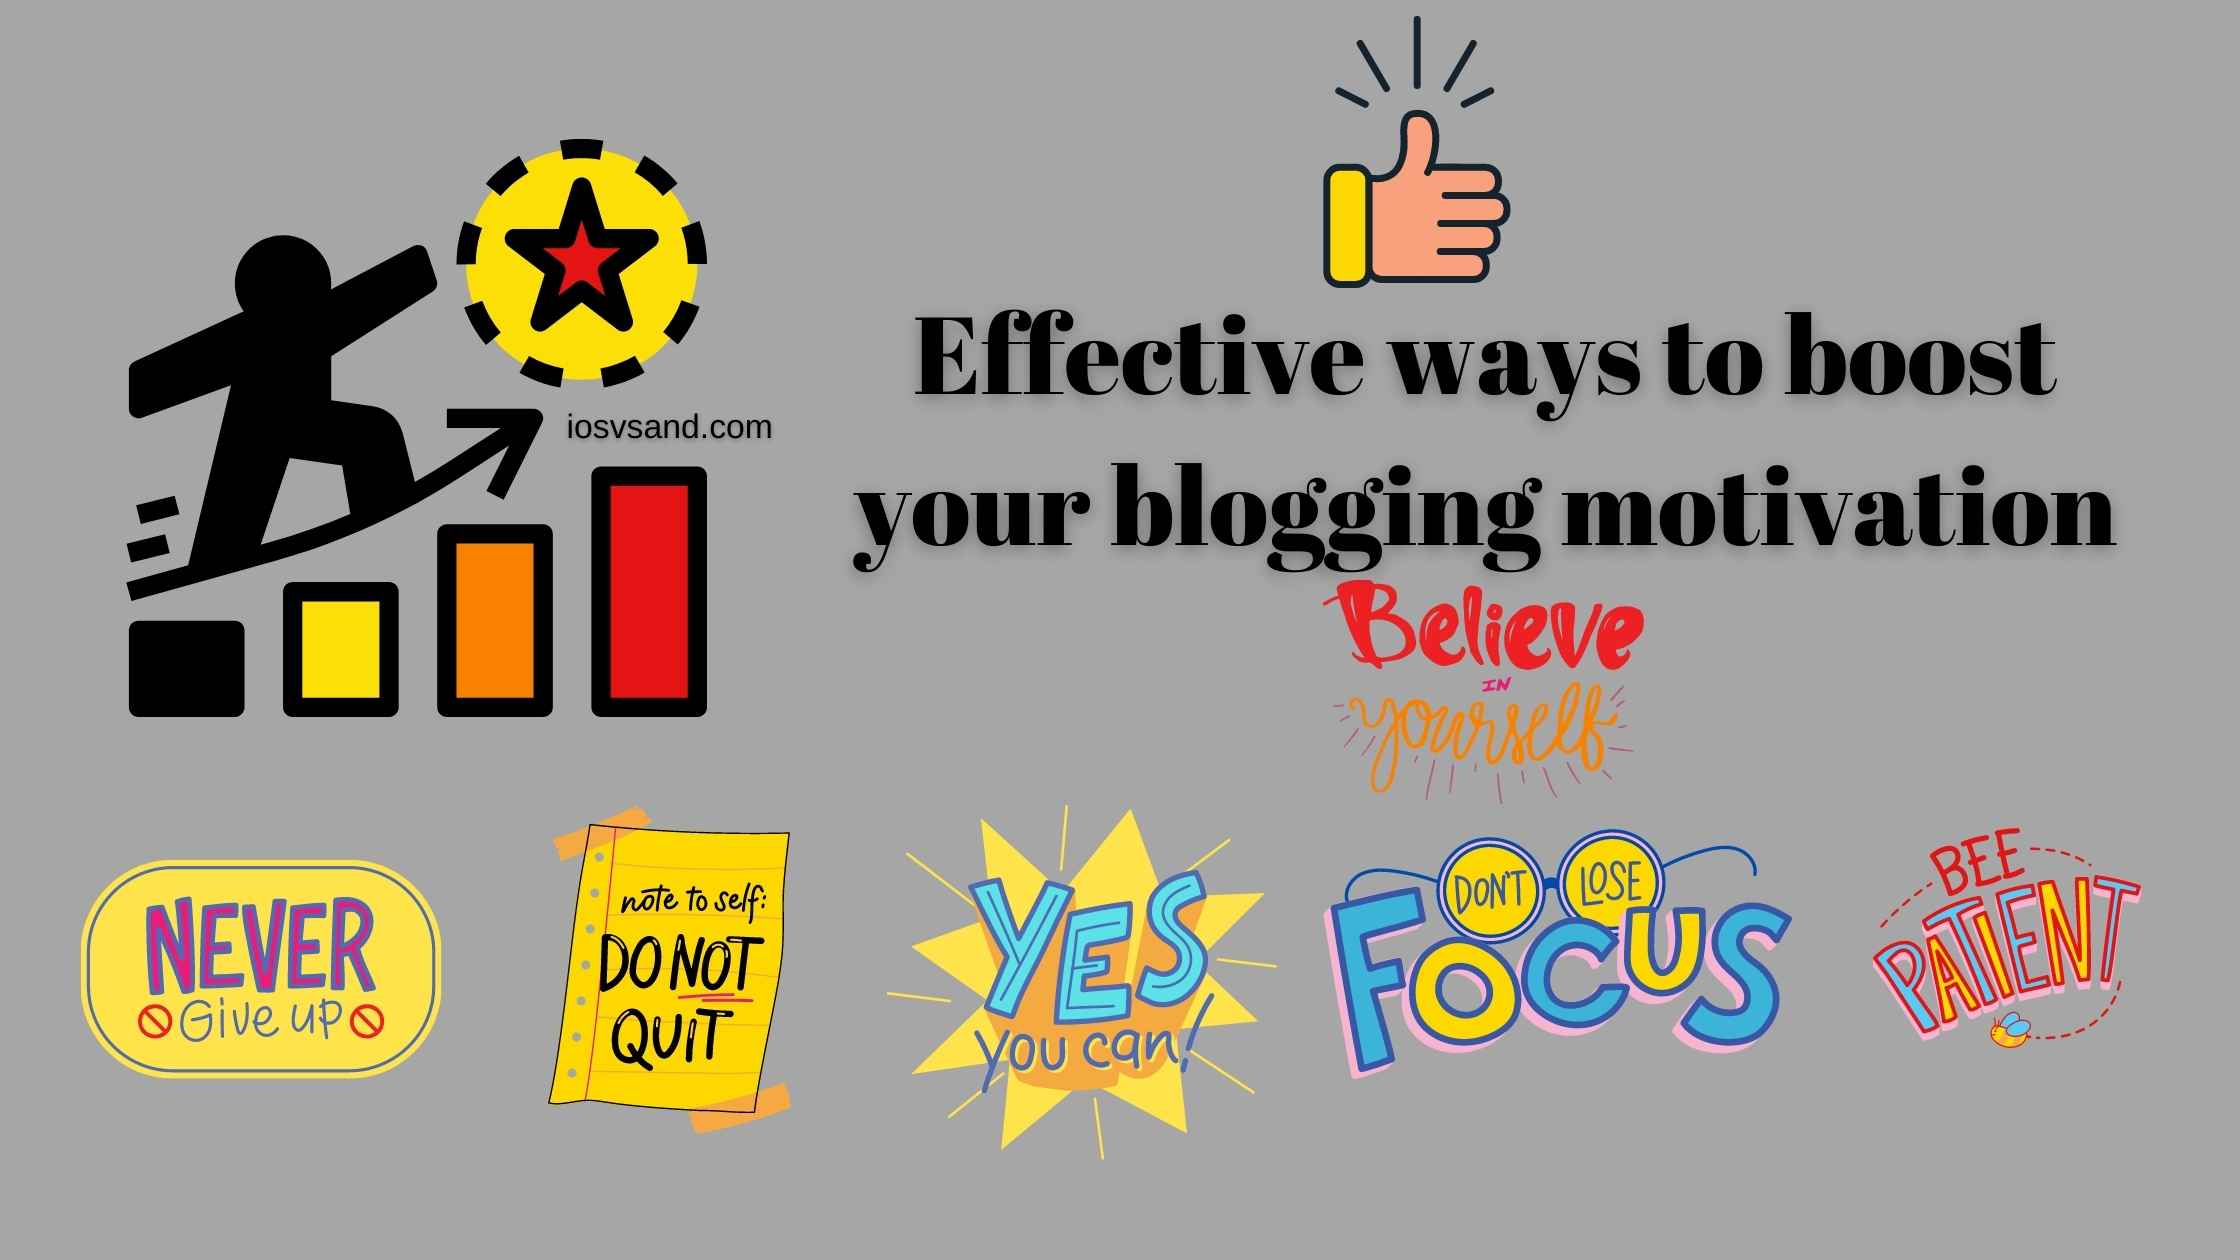 How to Inspire Yourself for Blogging?